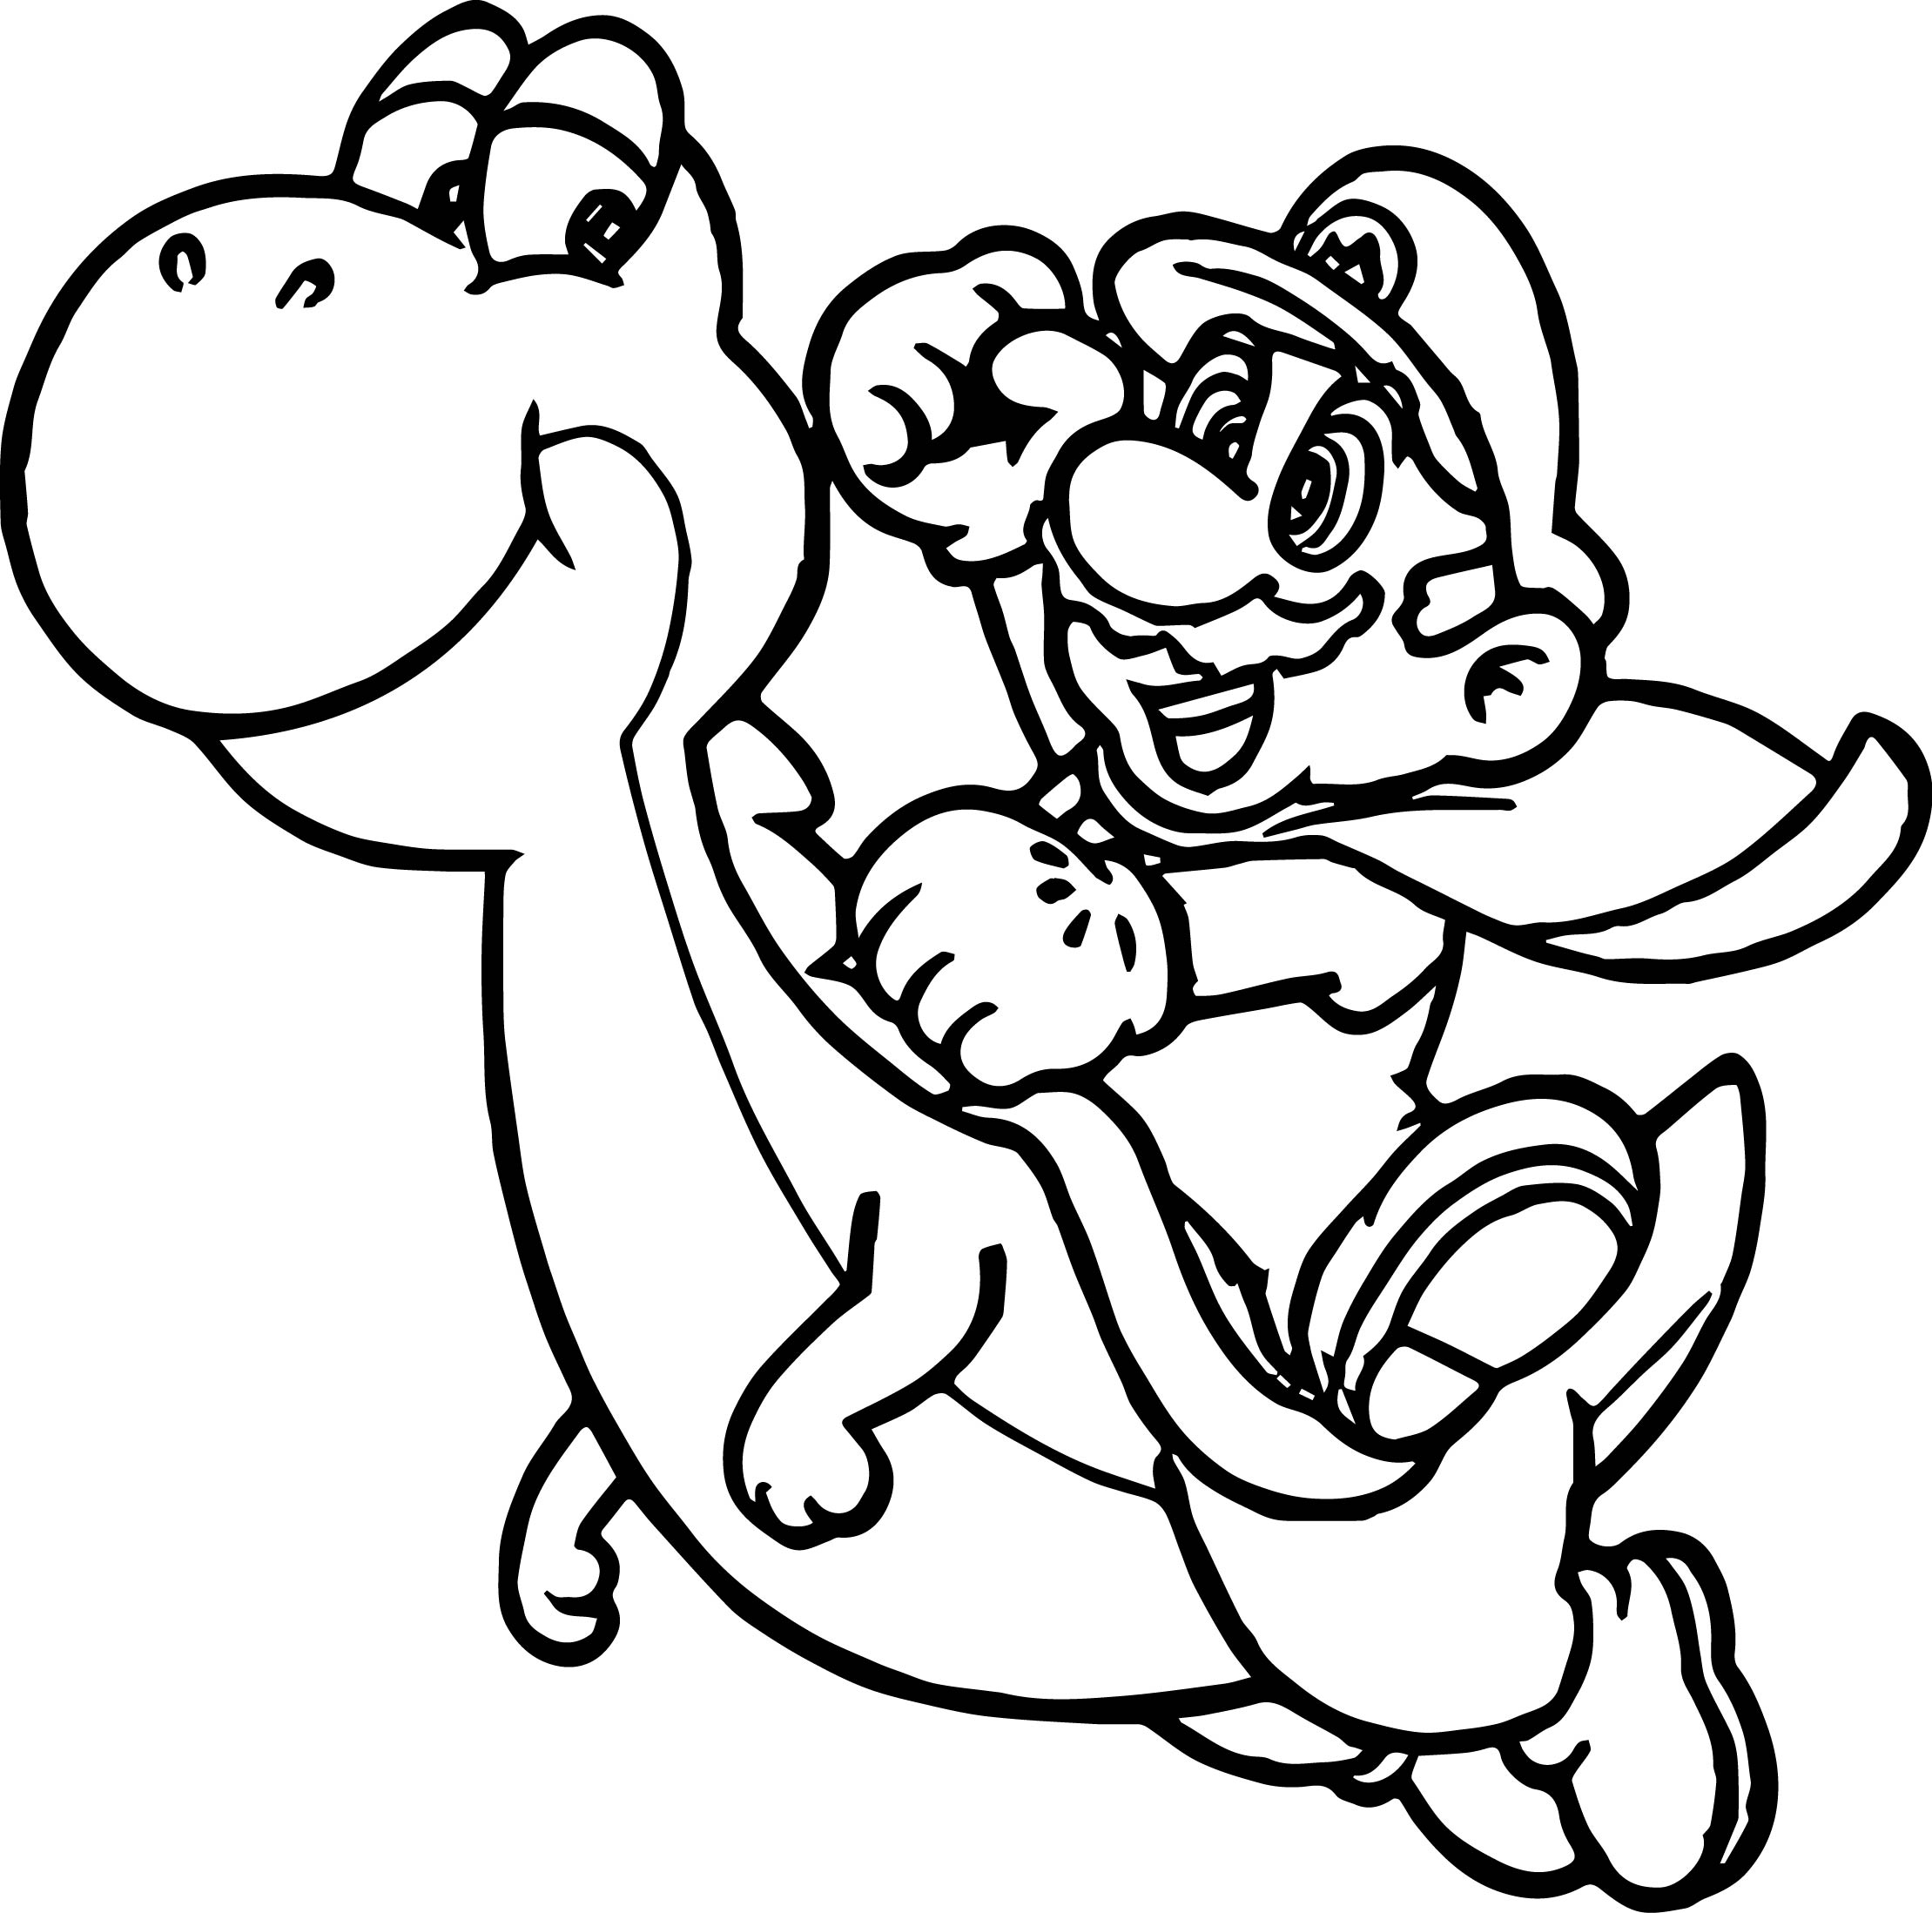 Mario Coloring Pages To Print Coloring Pages For Kids Printable Super Mario With Coloring Page